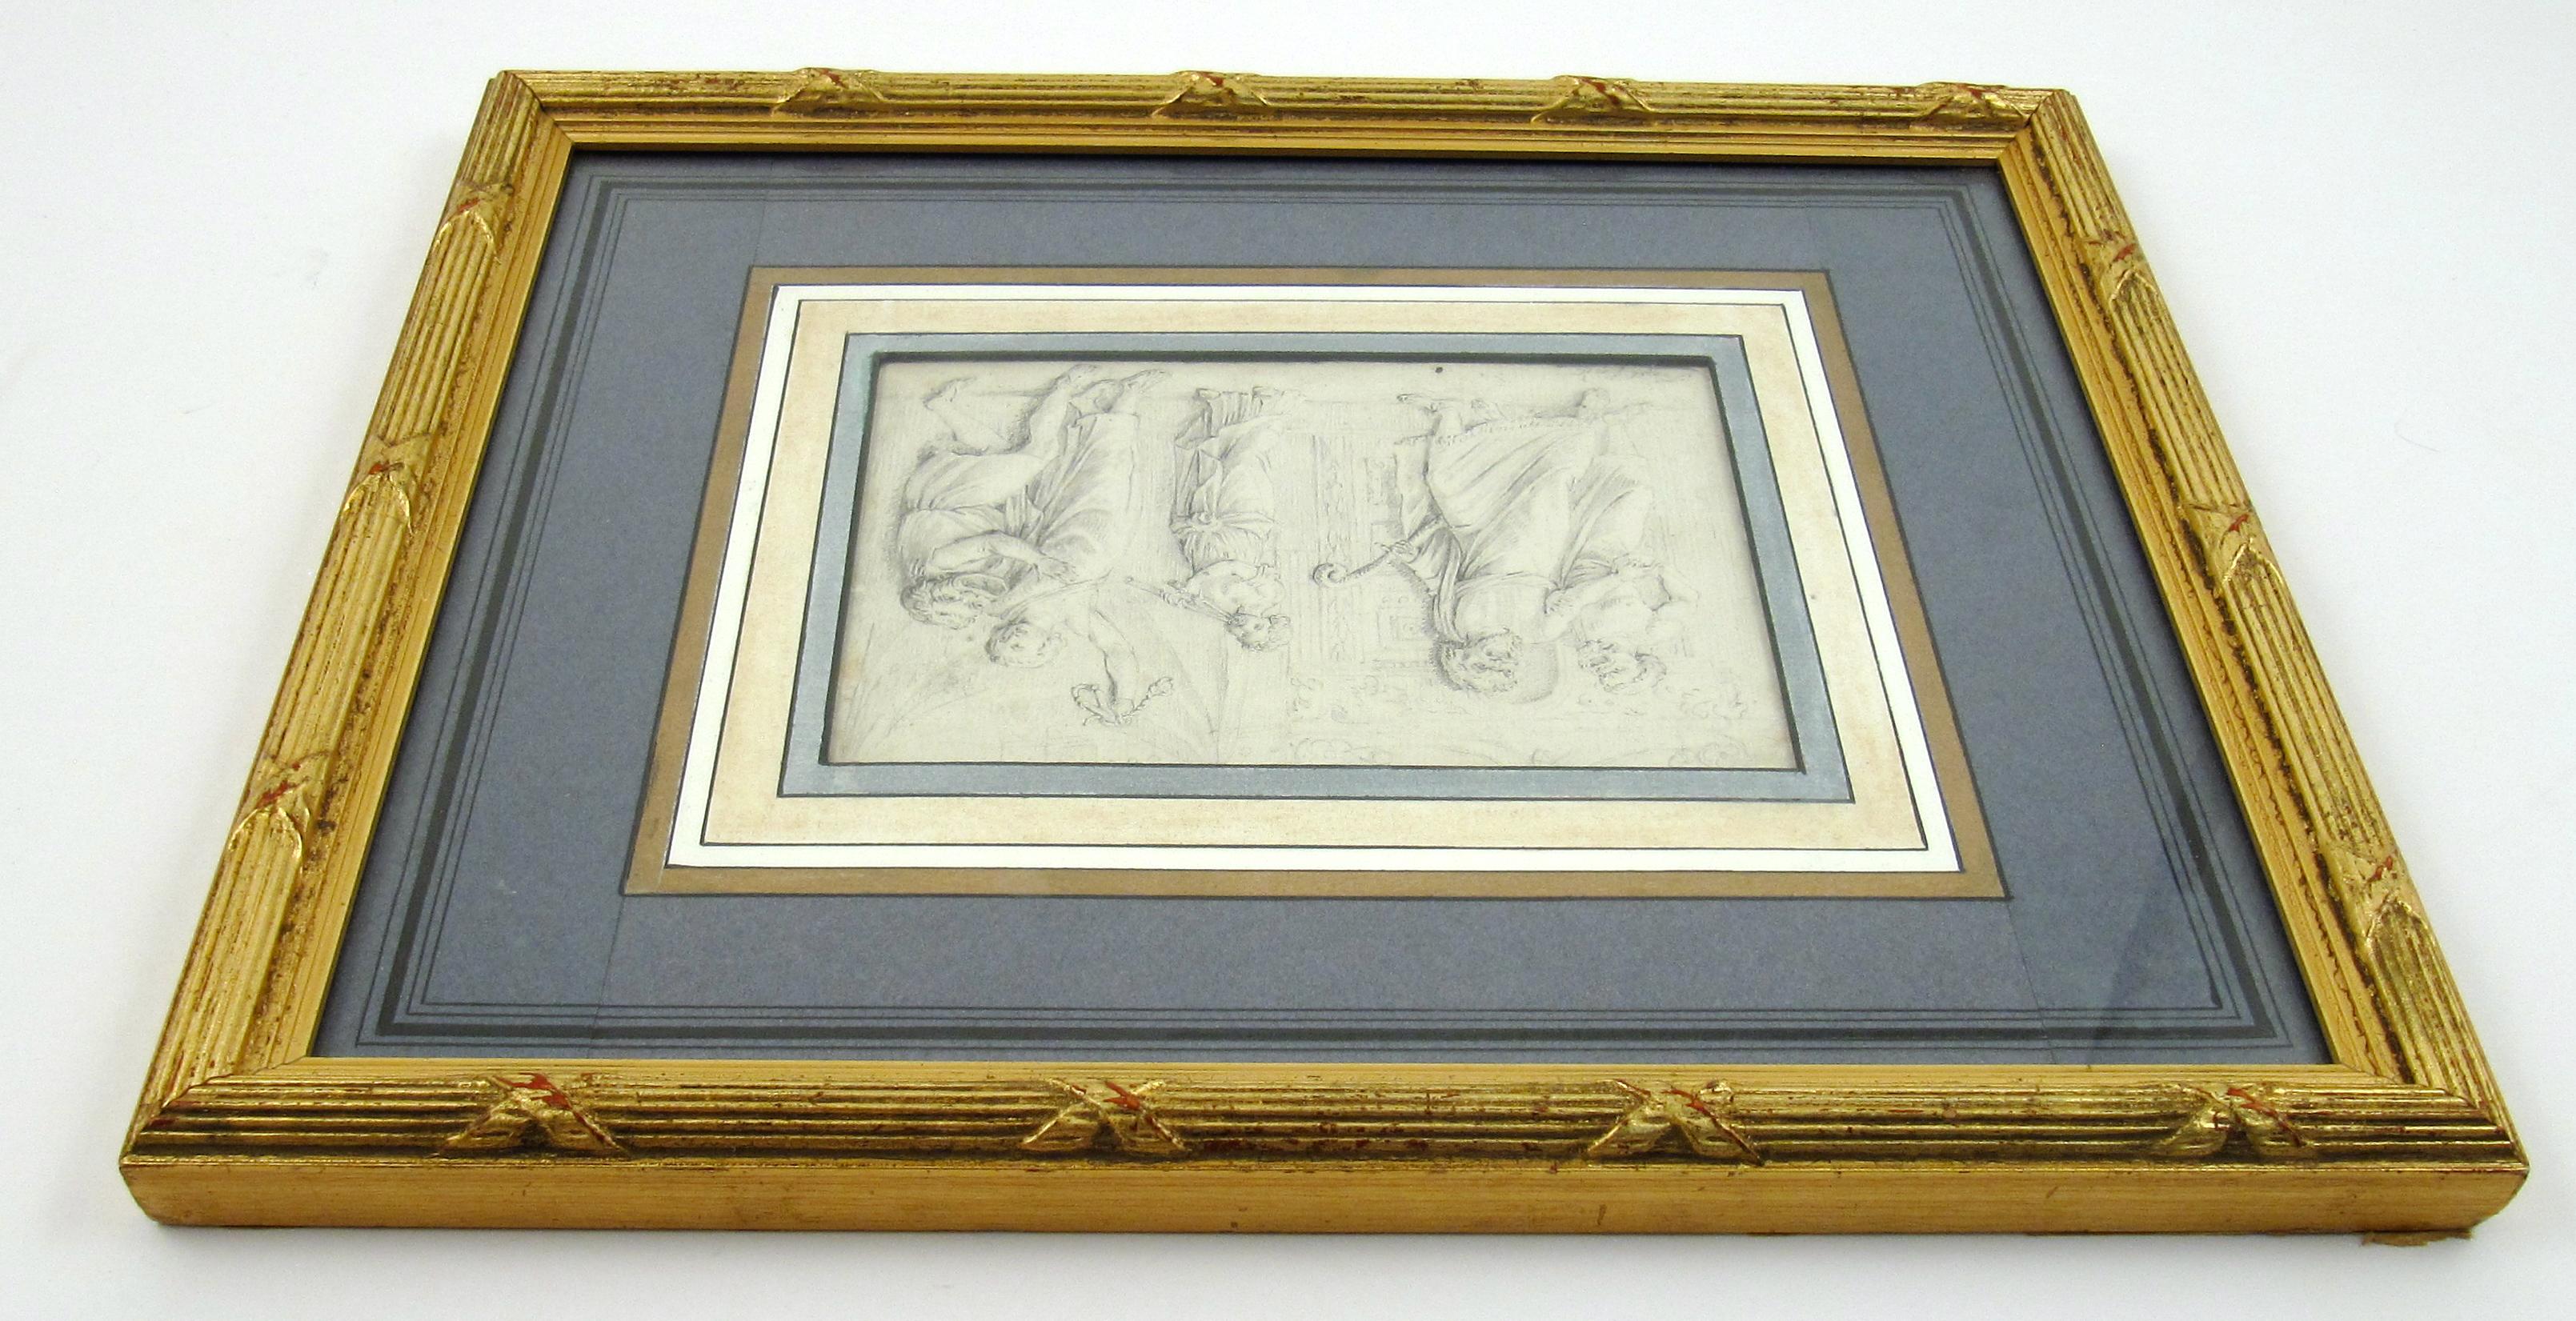 François-Édouard Picot 
(French, 1786 – 1868)

Ancient Greek Comedy Play

•	Pencil Drawing on laid paper behind decorative matting, visible image, ca. 10.5 x 15.5 cm
•	Modern Glased frame, ca. 27 x 33 cm
•	Signed 